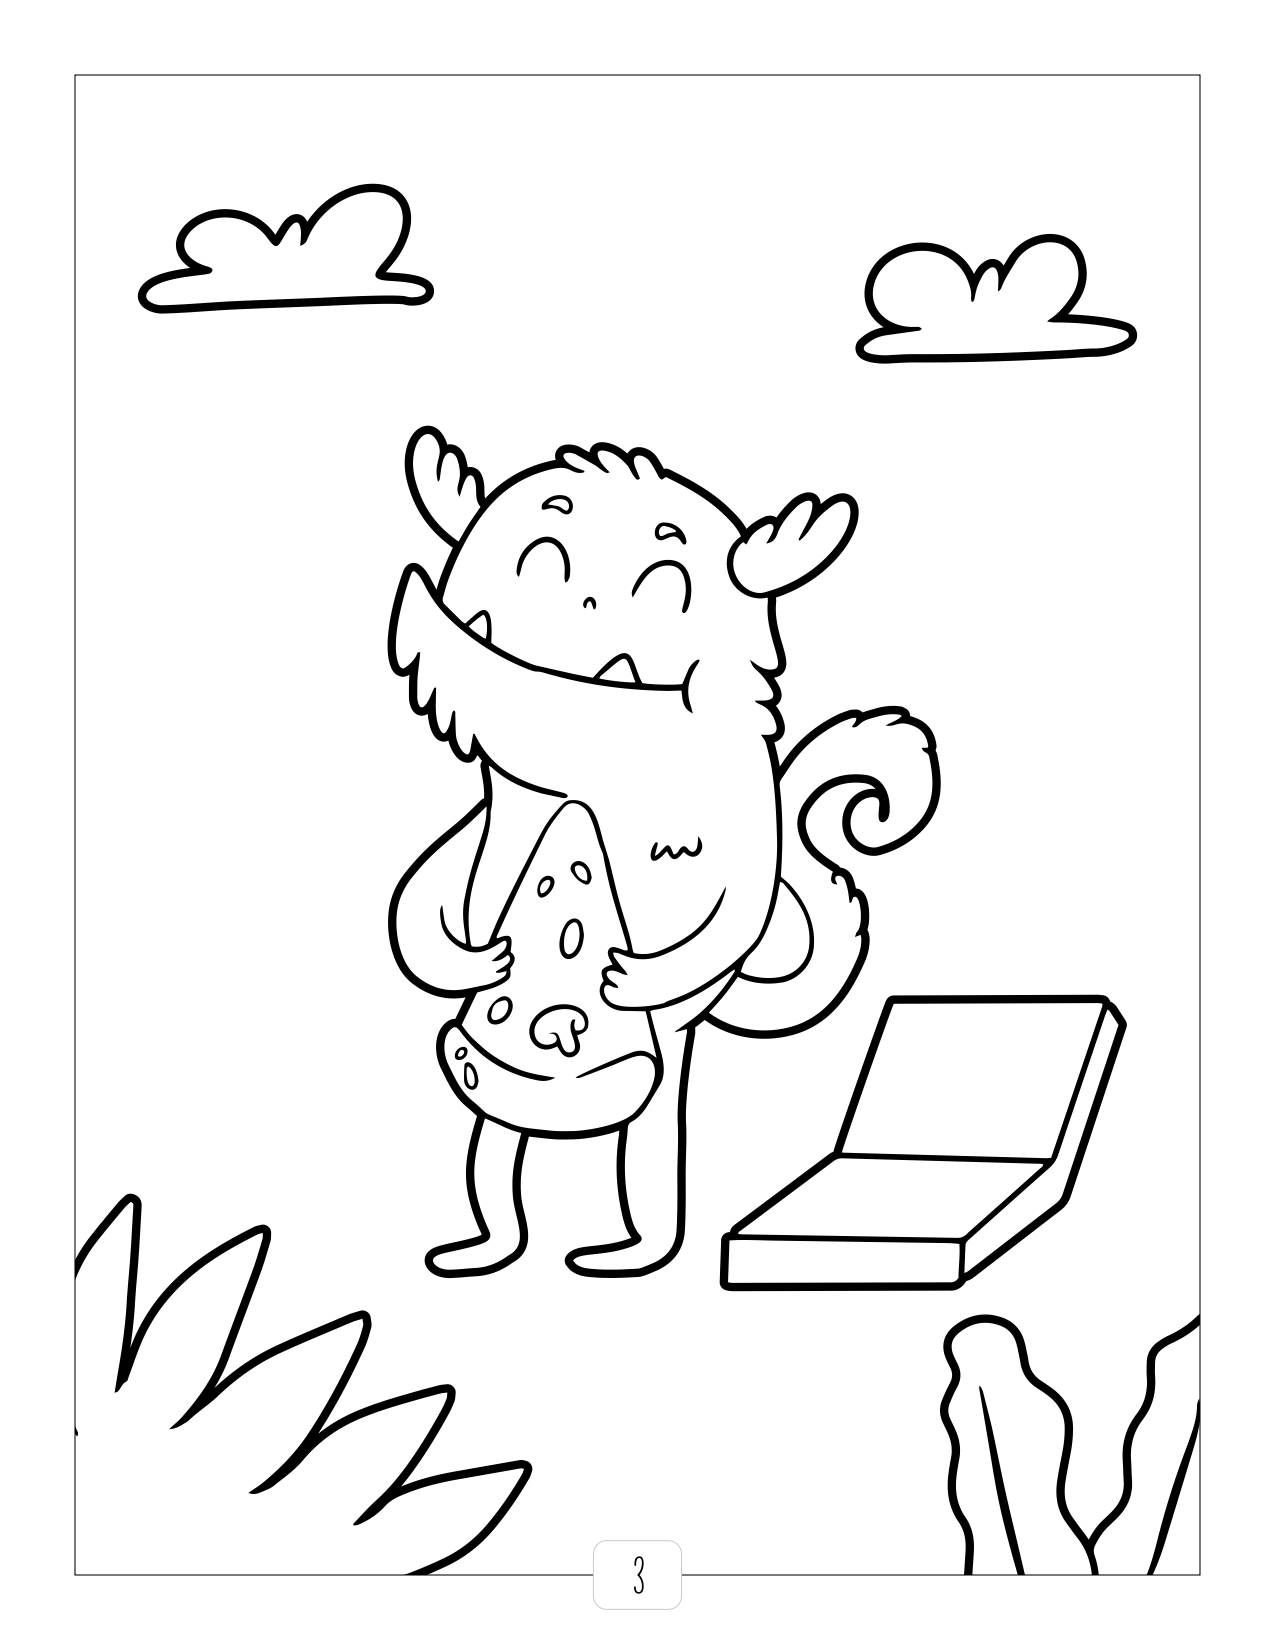 Cartoon style monster coloring page for kids